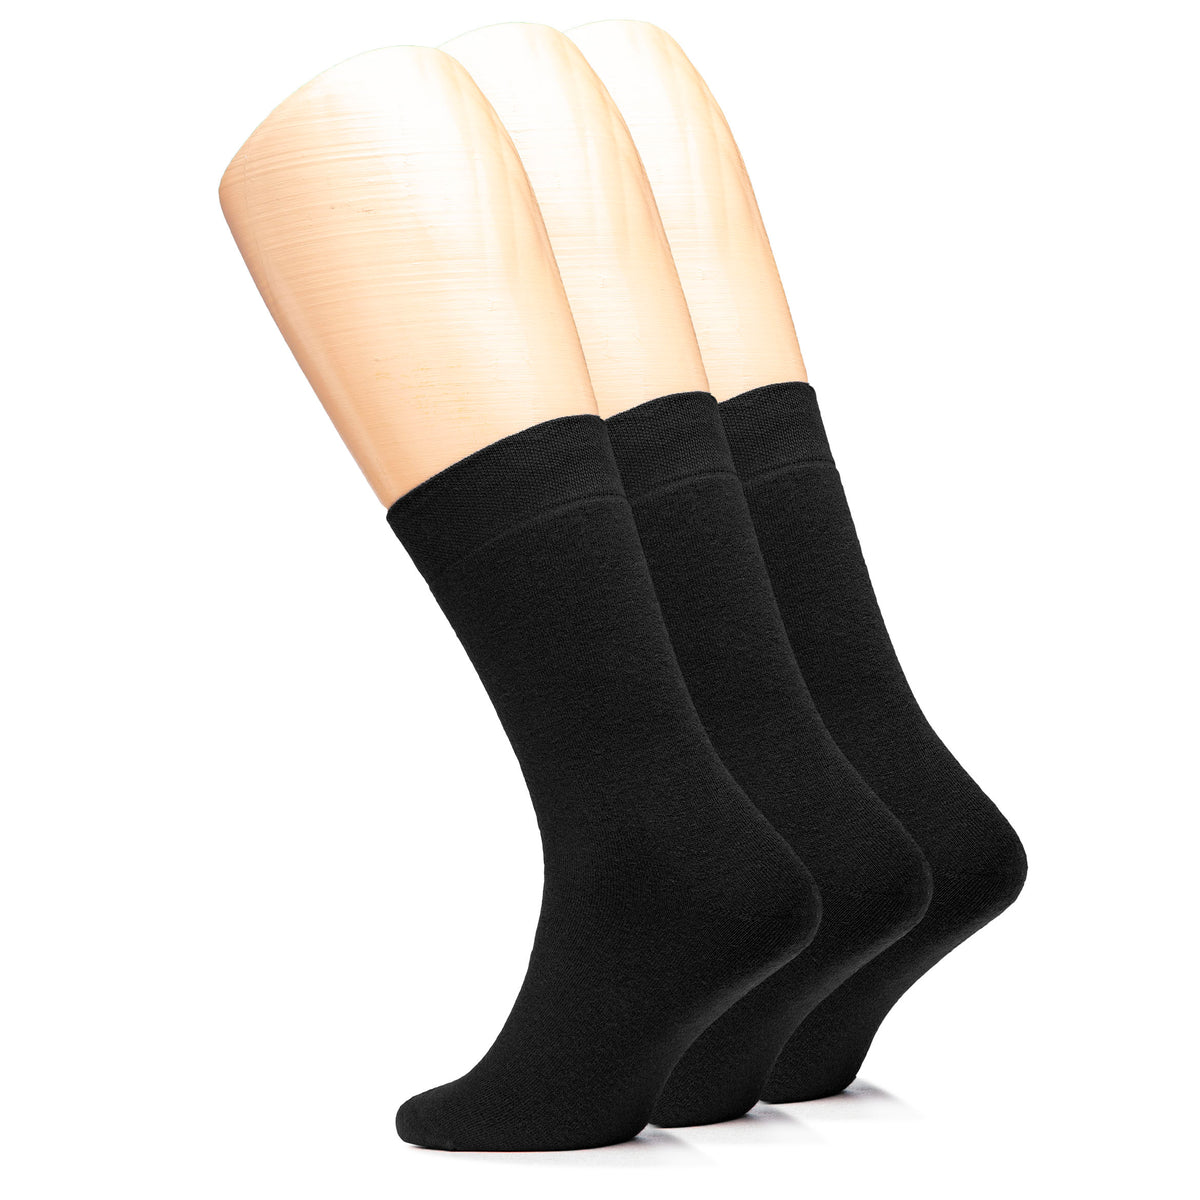 A trio of men's cotton full cushion ankle socks in black, neatly arranged on a white background.